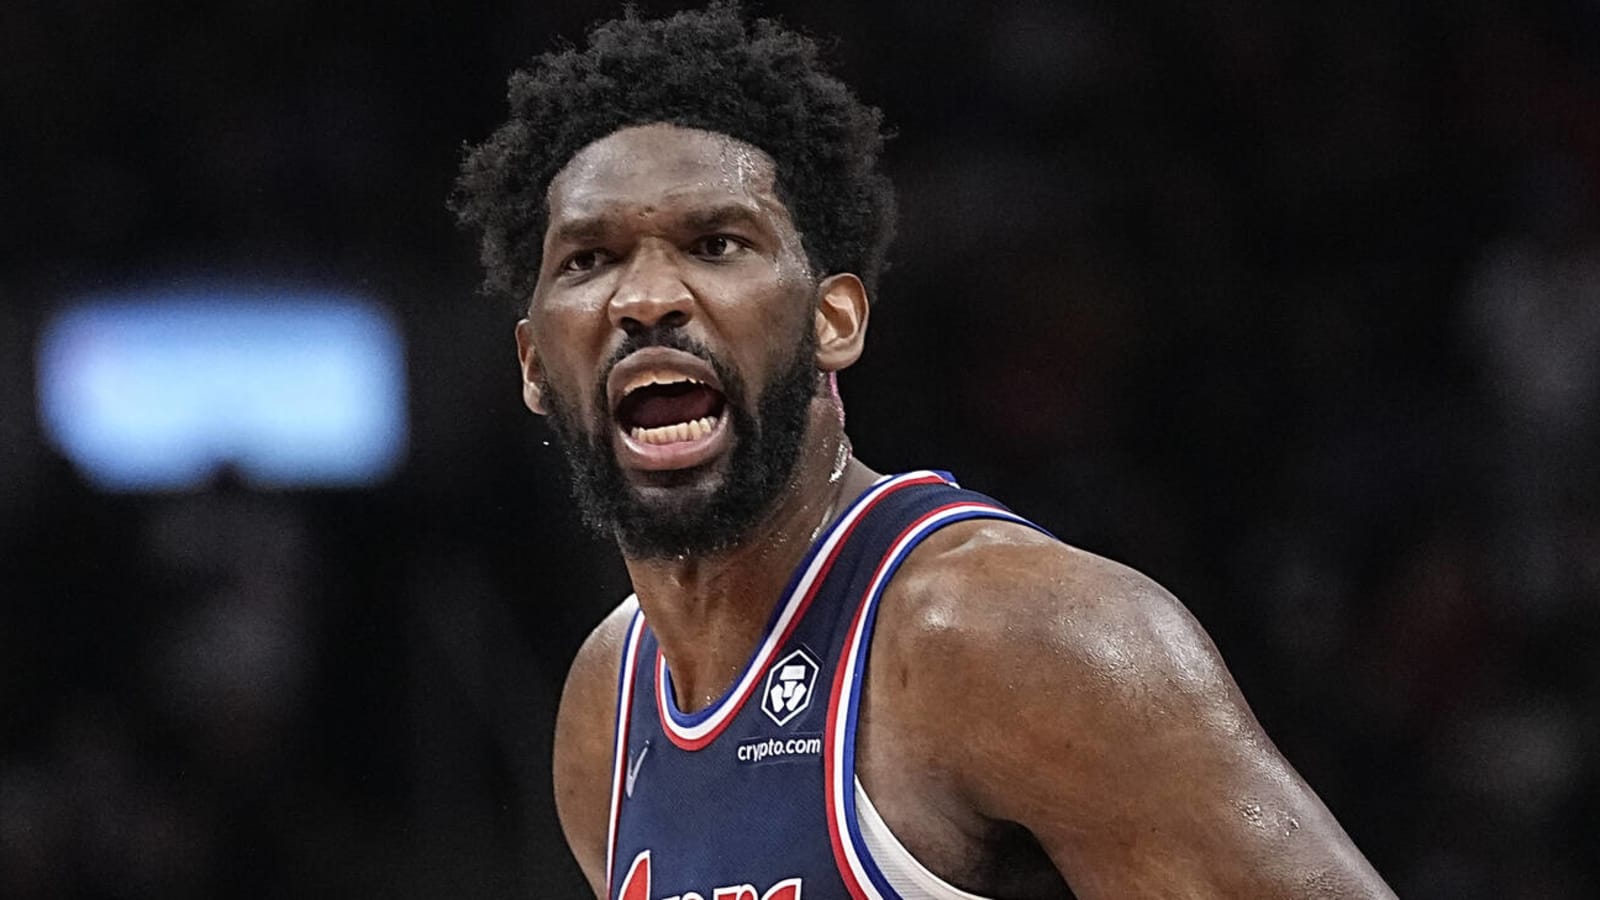 Embiid plans to get MRI on injured thumb after Game 4